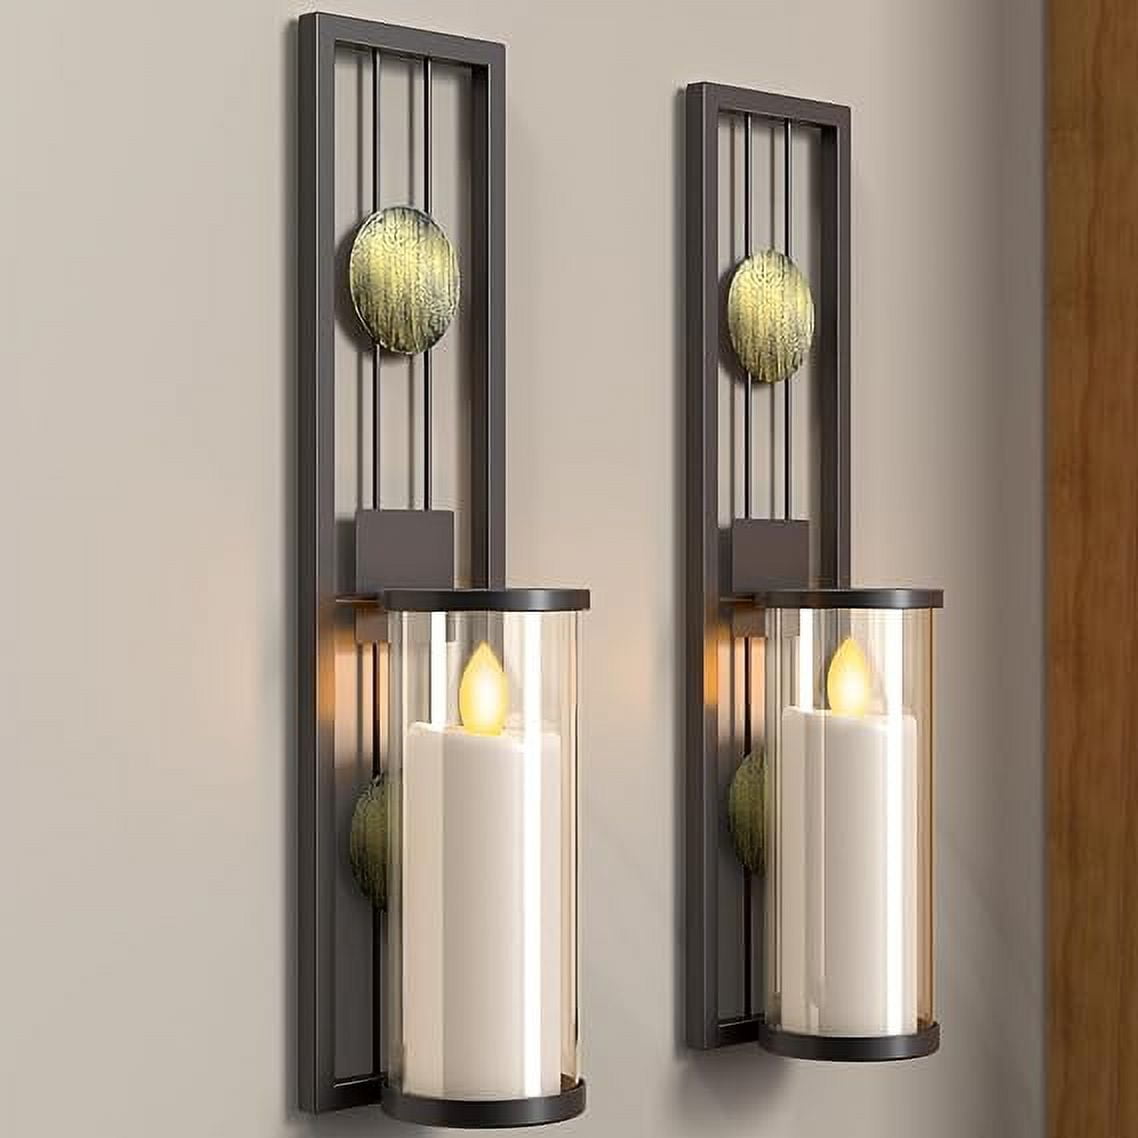 ALLADINBOX Wall Candle Holder Sconces Classic Metal Acrylic Decor Home Living Dinning Room Bathroom Light Up Decor Set 2 745bc946 384d 4d83 9668 09e1875b7636.bd948663411bc152bdf86a0b57cdb1a9